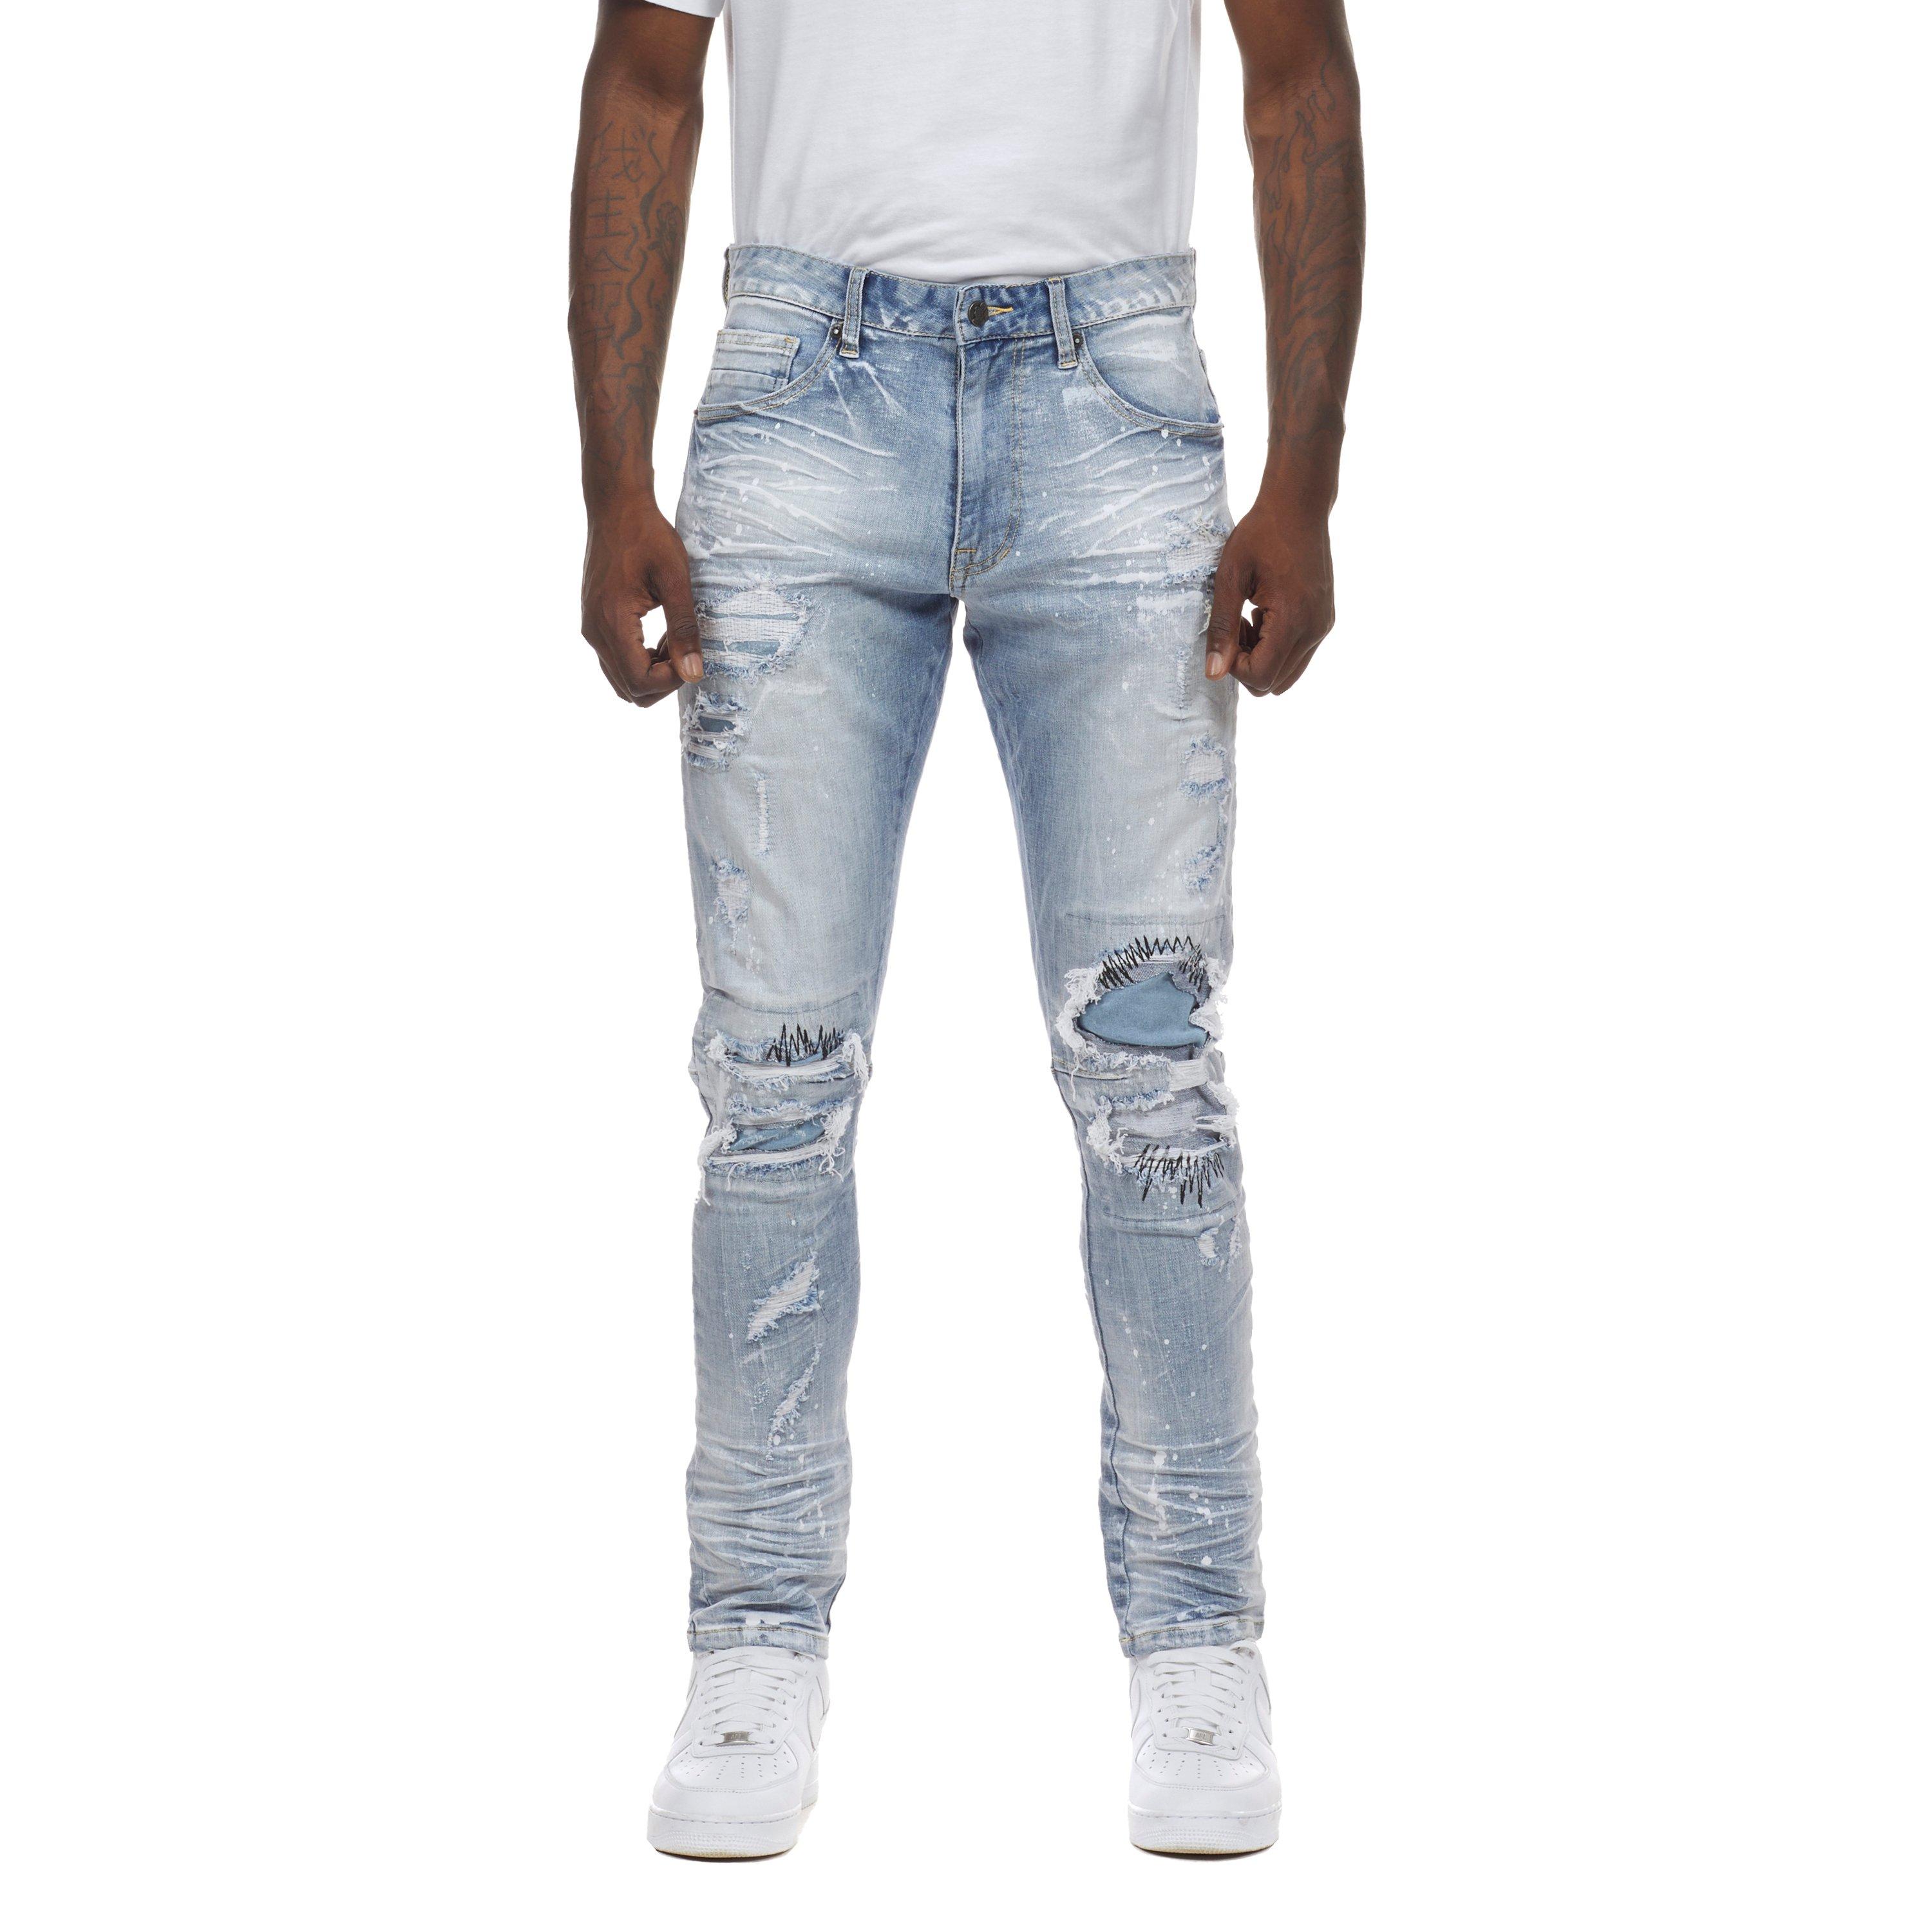 good jeans to wear with jordans